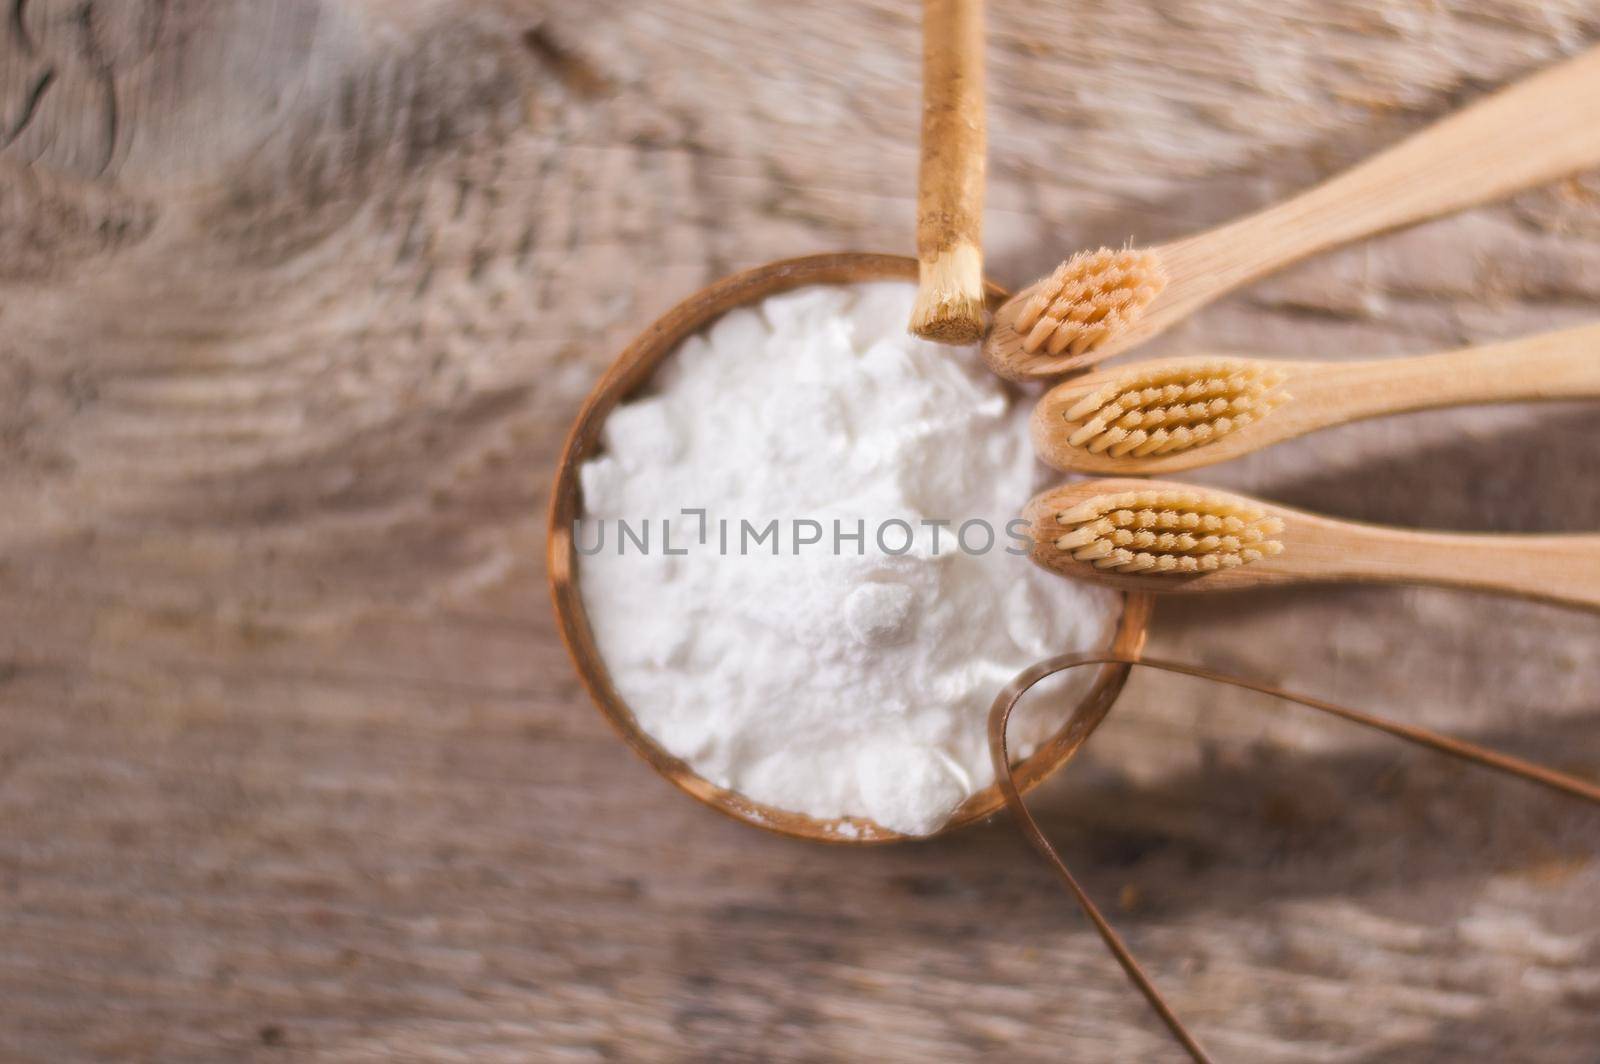 bamboo toothbrush with baking soda and miswak. High quality photo